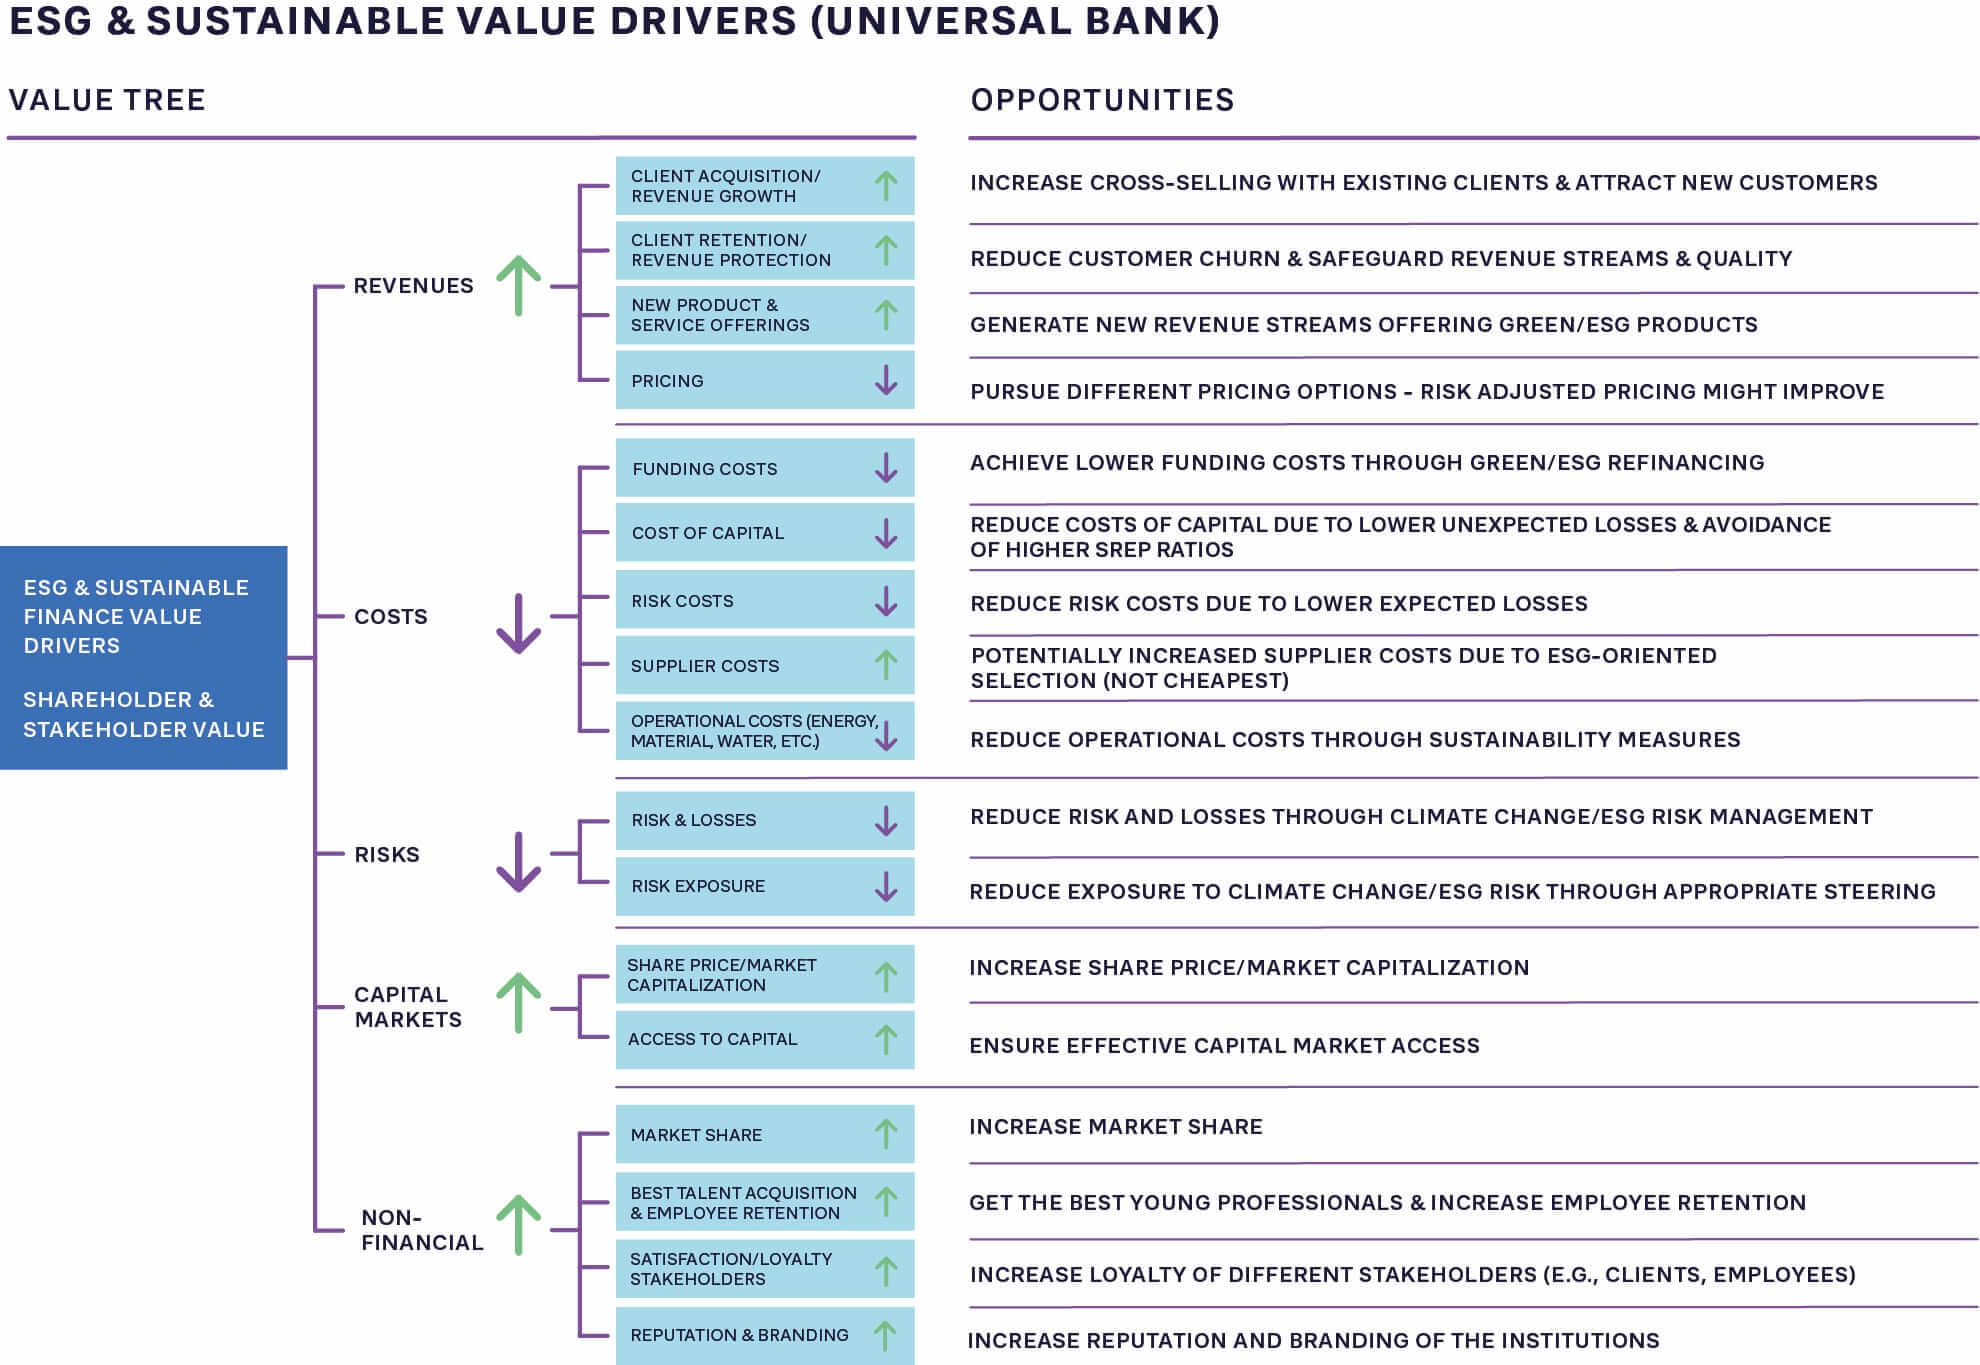 ESG AND SUSTAINABLE VALUE DRIVERS